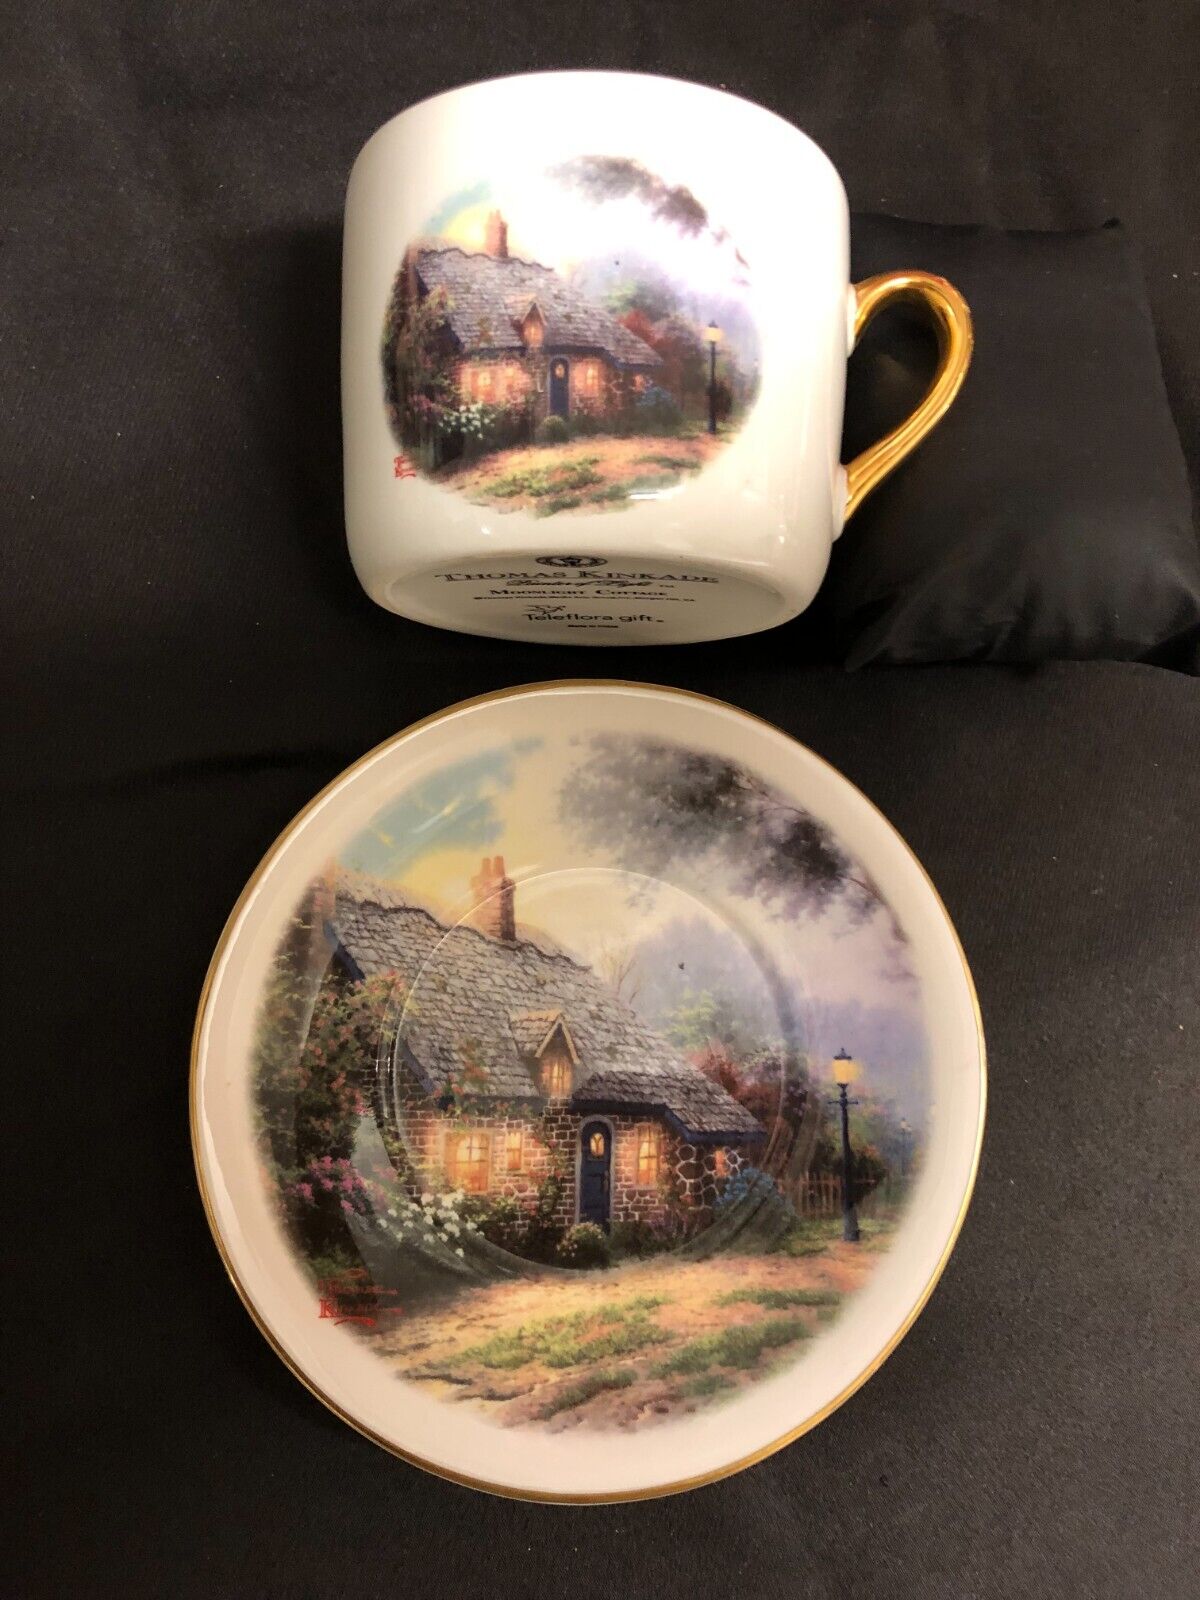 Thomas Kincaid Teleflora Moonlight Cottage Porcelain Coffee Cup and Saucer